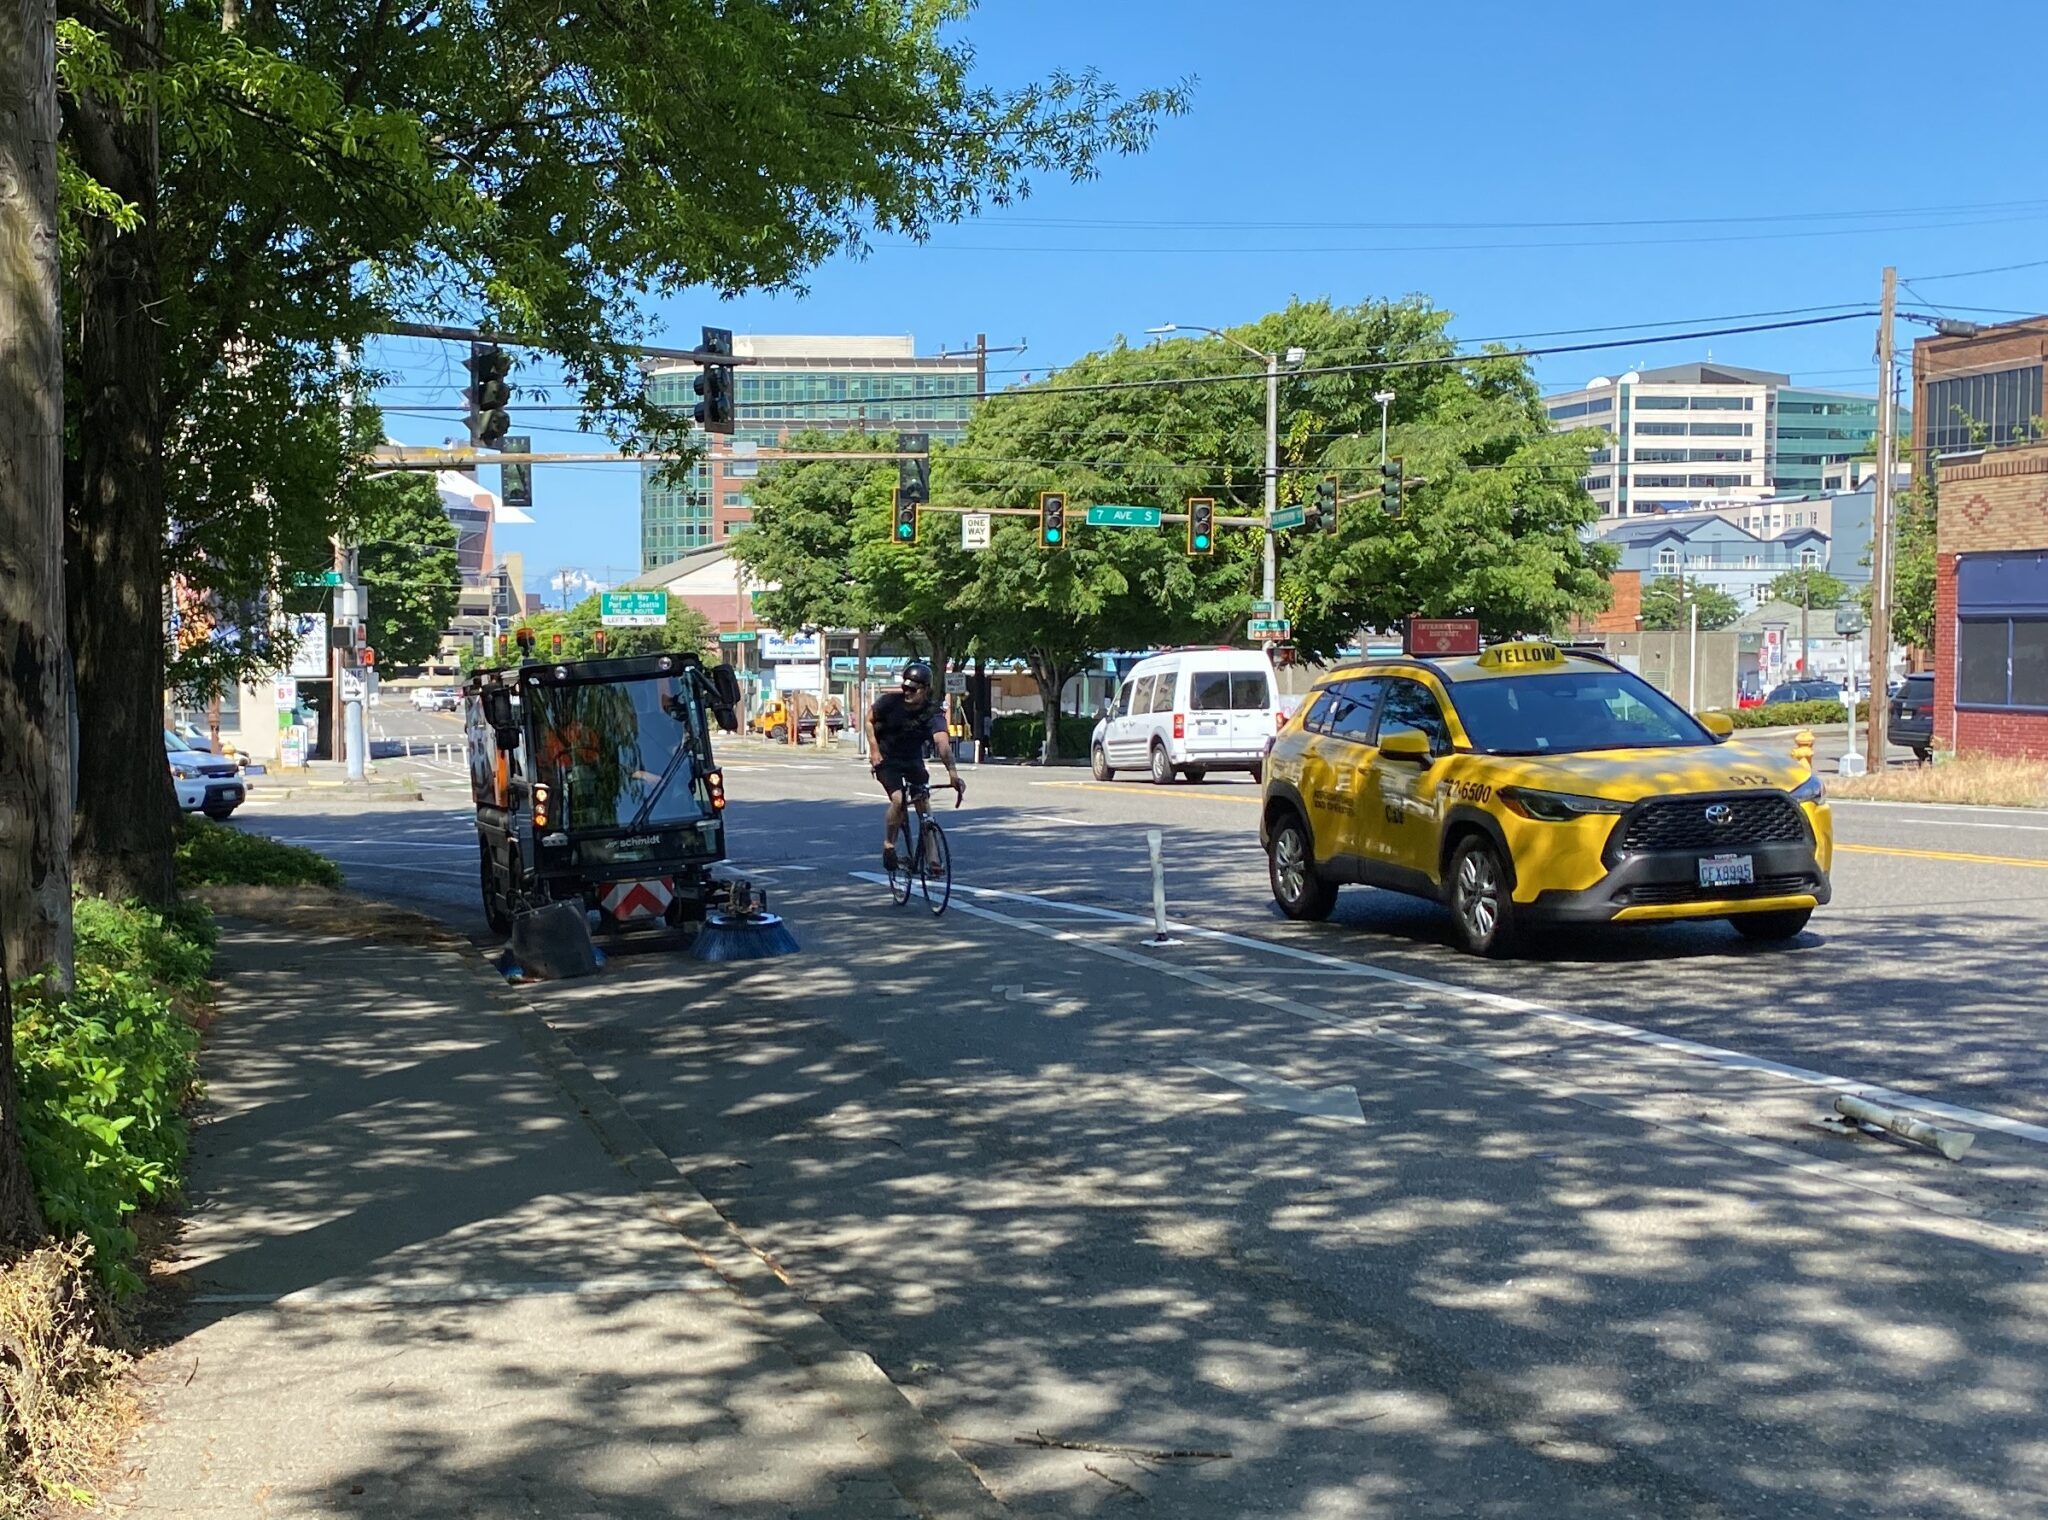 The electric sweeper in a bike lane clearing it of debris while a bicycle rider passes.